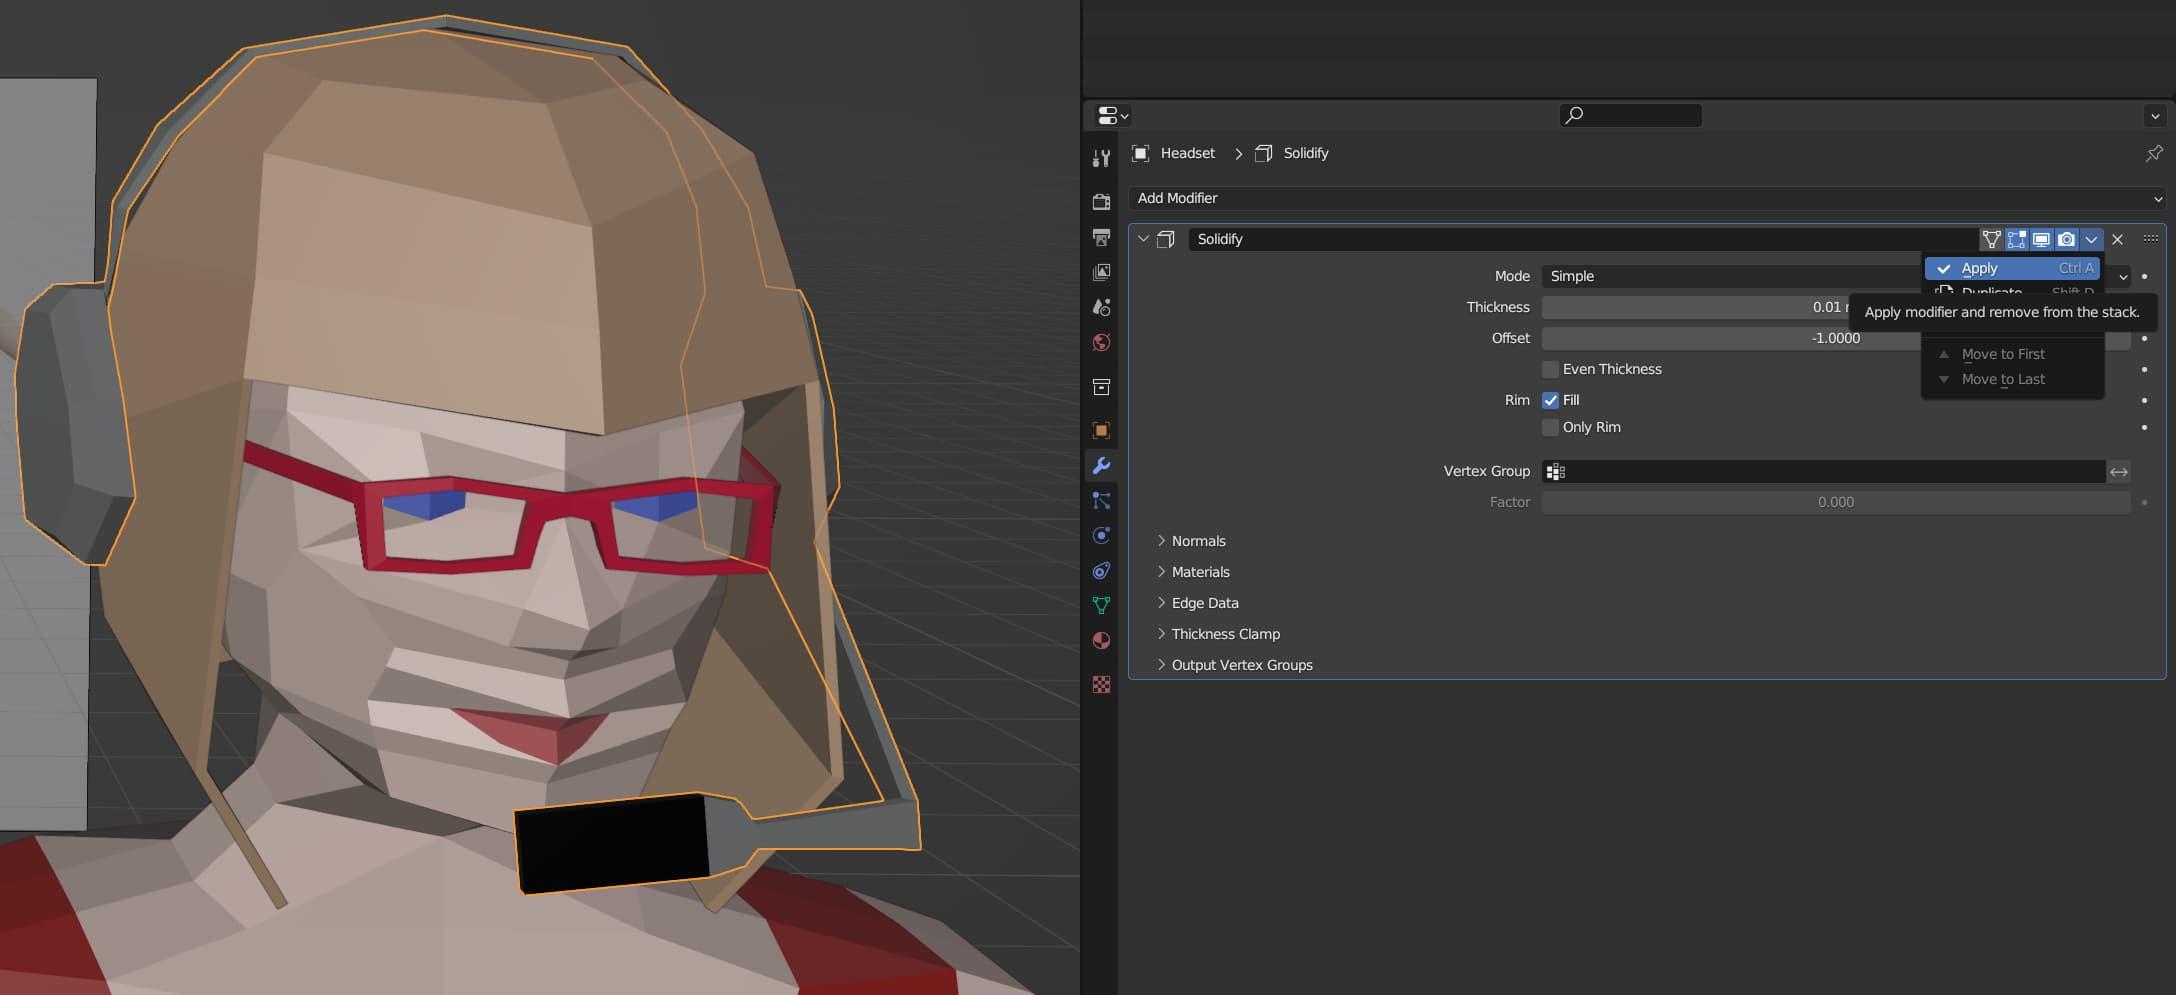 The model's head is now wearing a more reasonable-looking headset with one microphone. On the right side of the screen, the Apply option on the Solidify Modifier's context menu has been highlighted